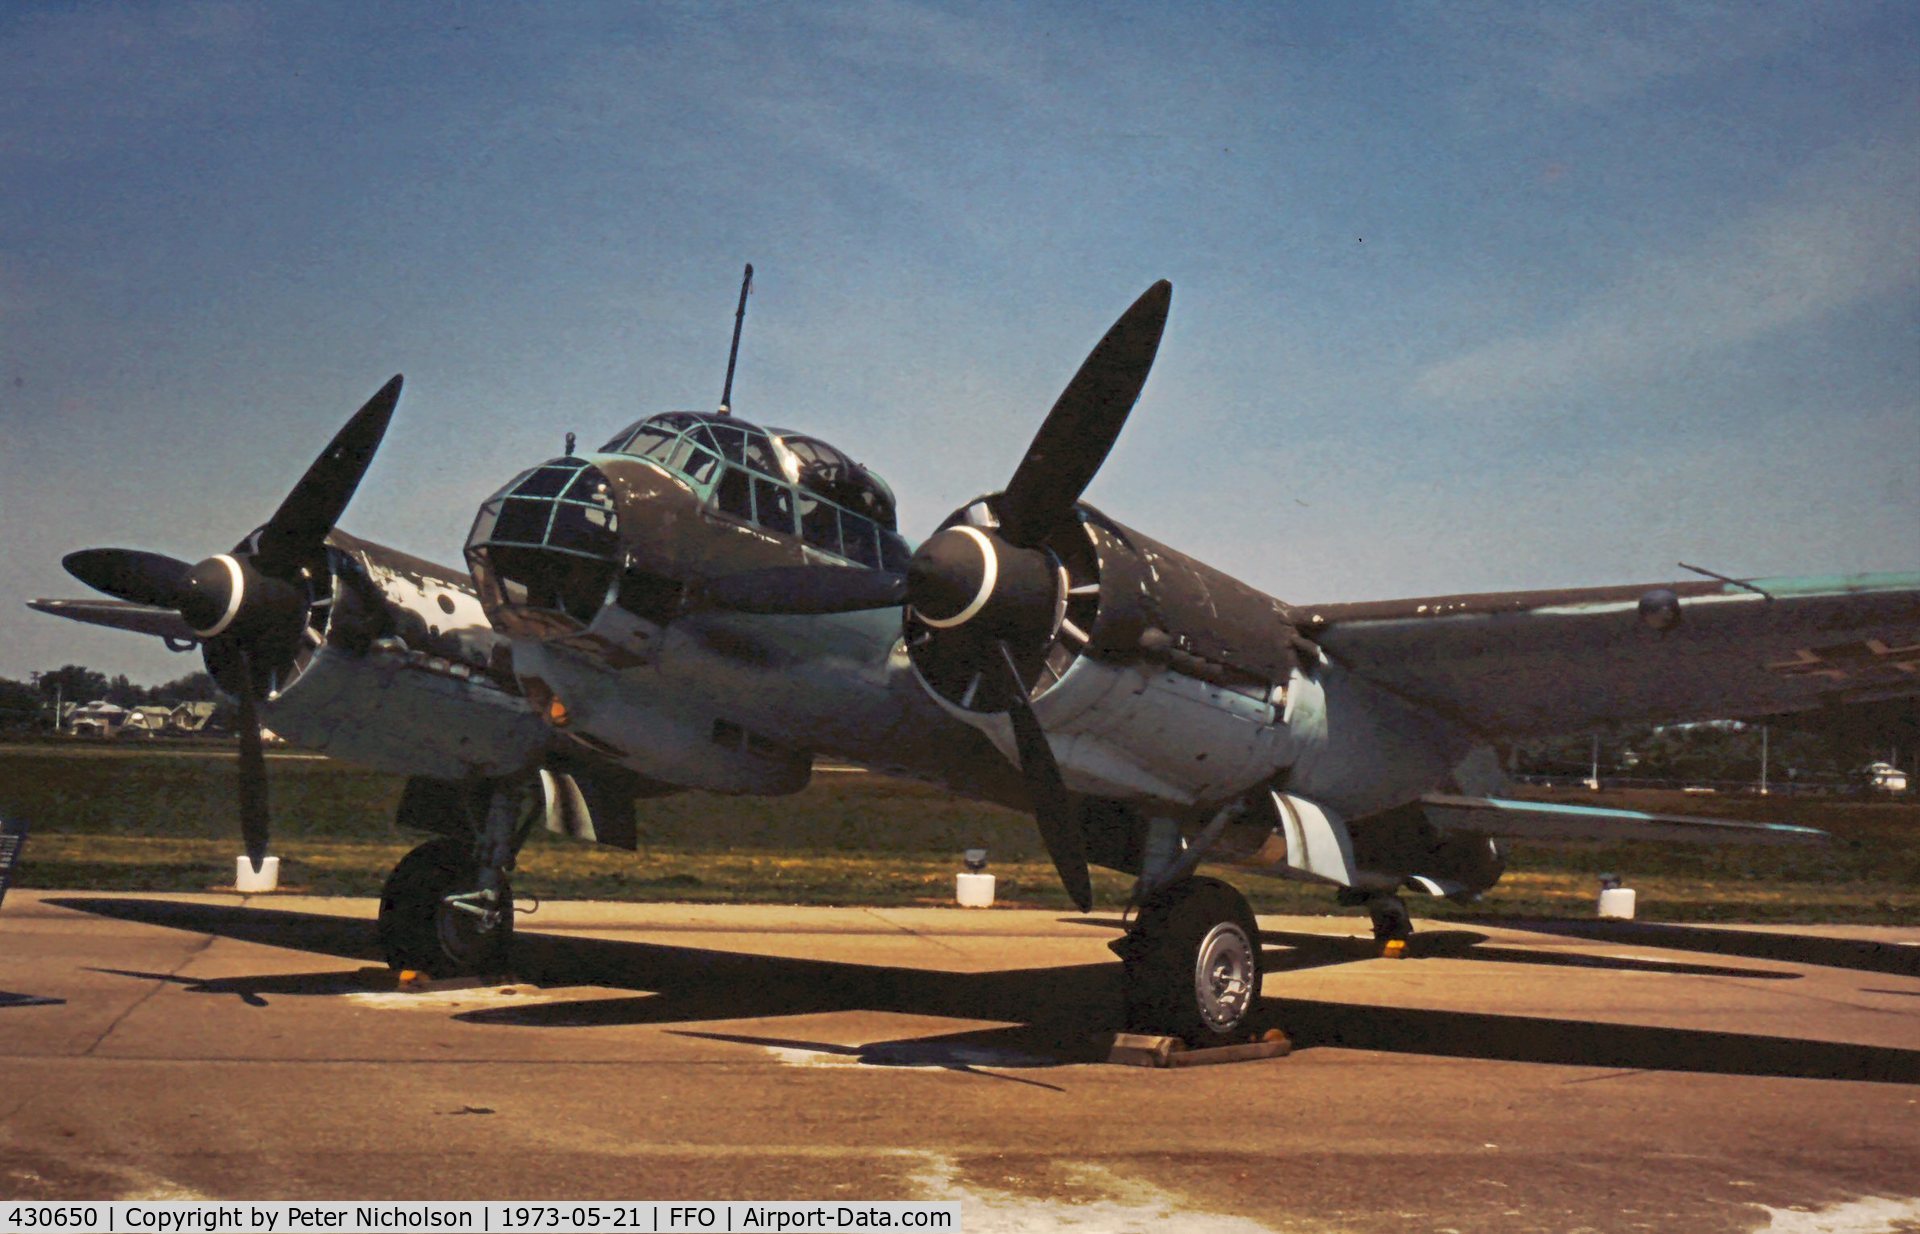 430650, 1943 Junkers Ju-88D-1/Trop C/N HK595, Another view of the Ju-88 as displayed in May 1973.